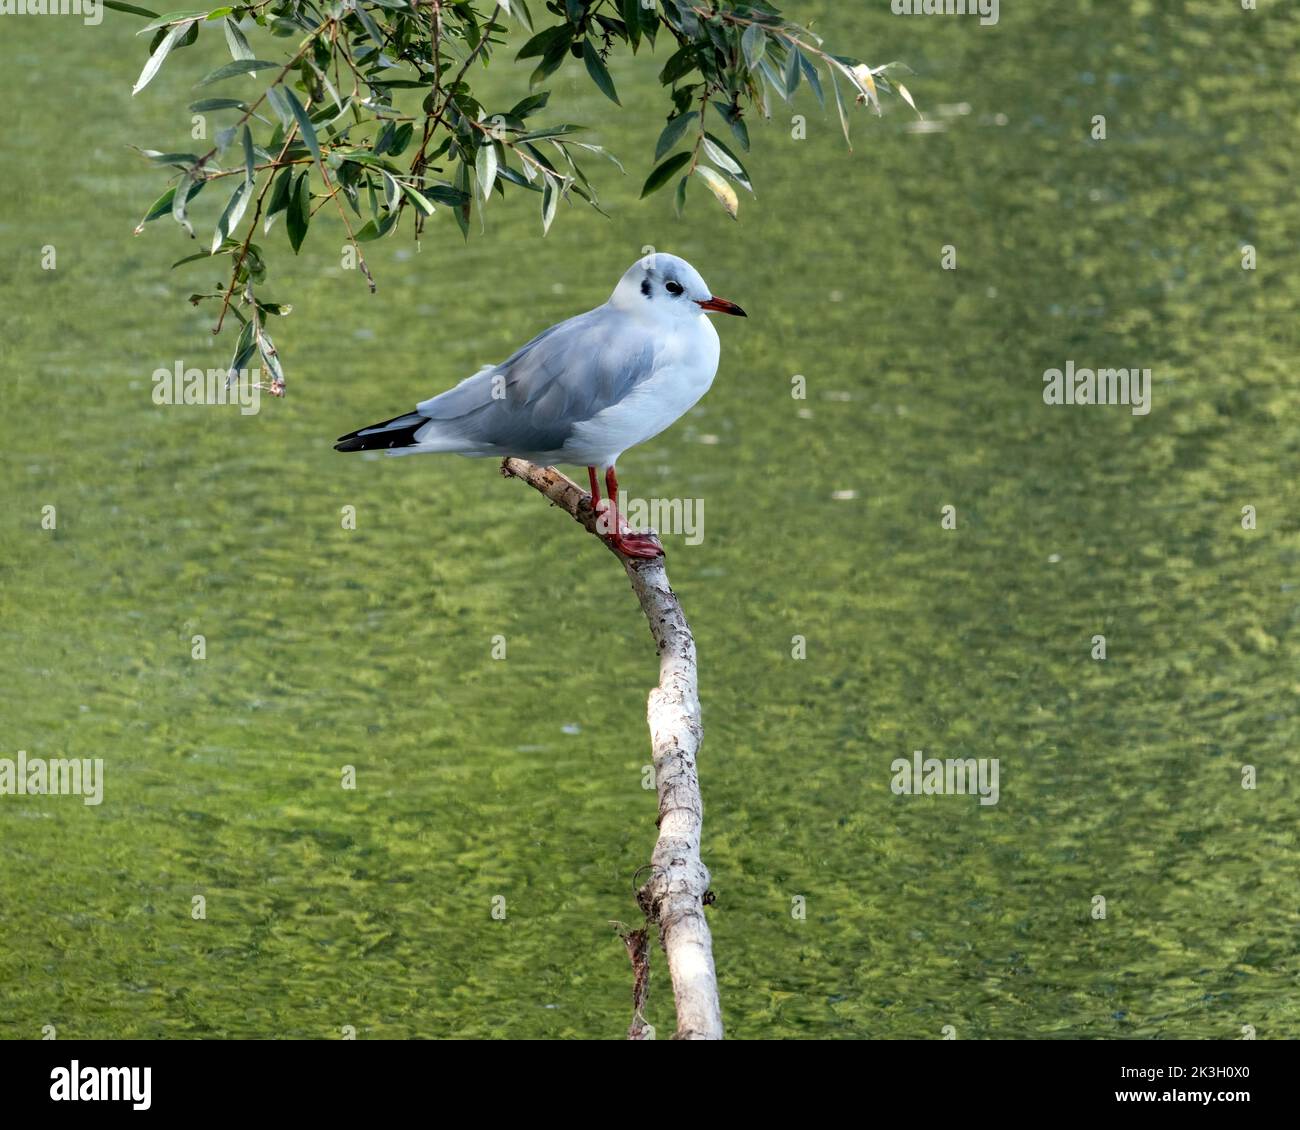 Black headed gull standing on a branch Stock Photo